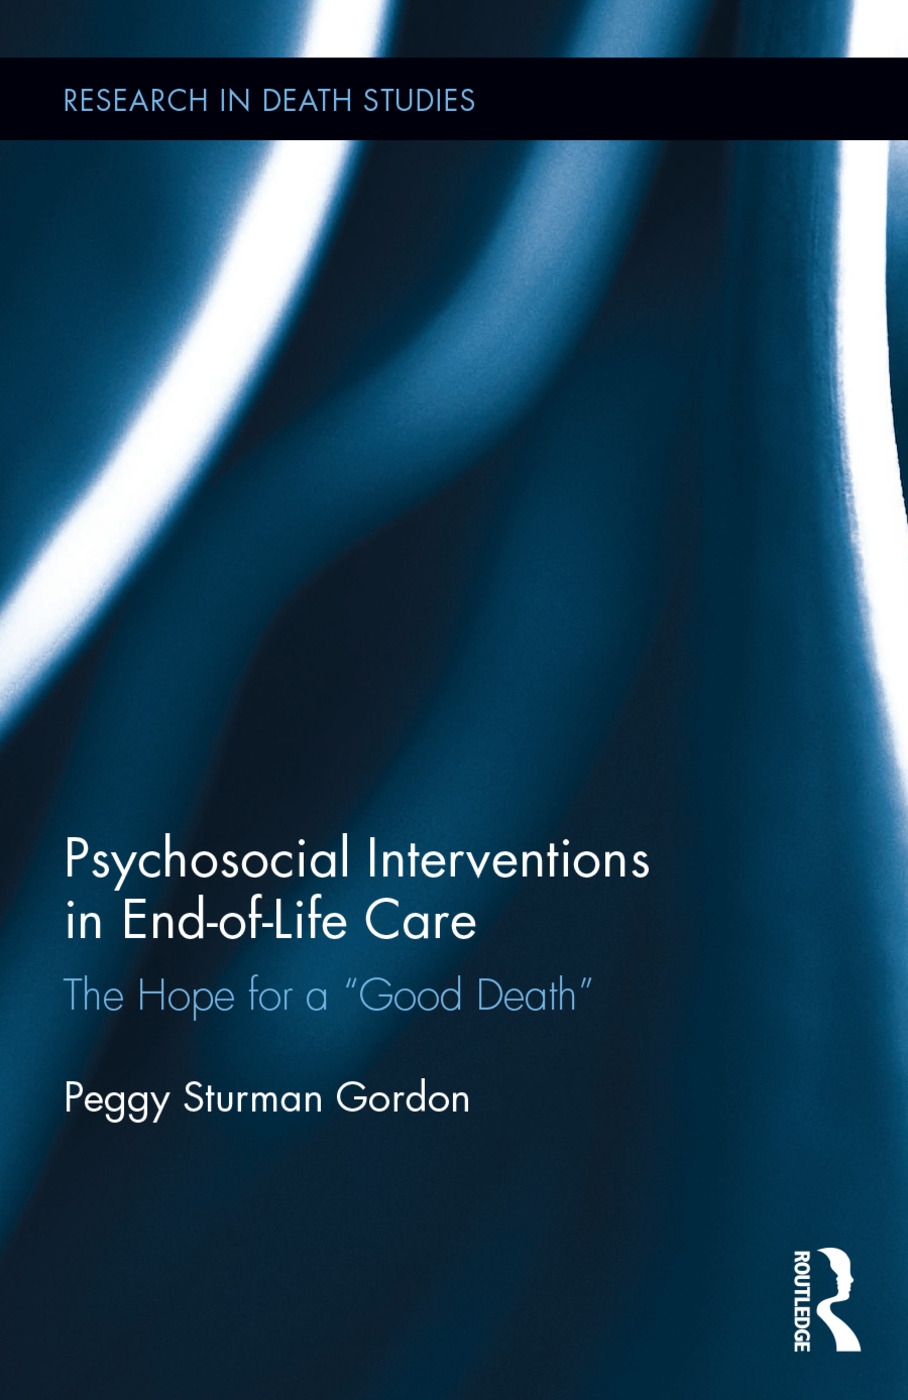 Psychosocial Interventions in End-Of-Life Care: The Hope for a Good Death